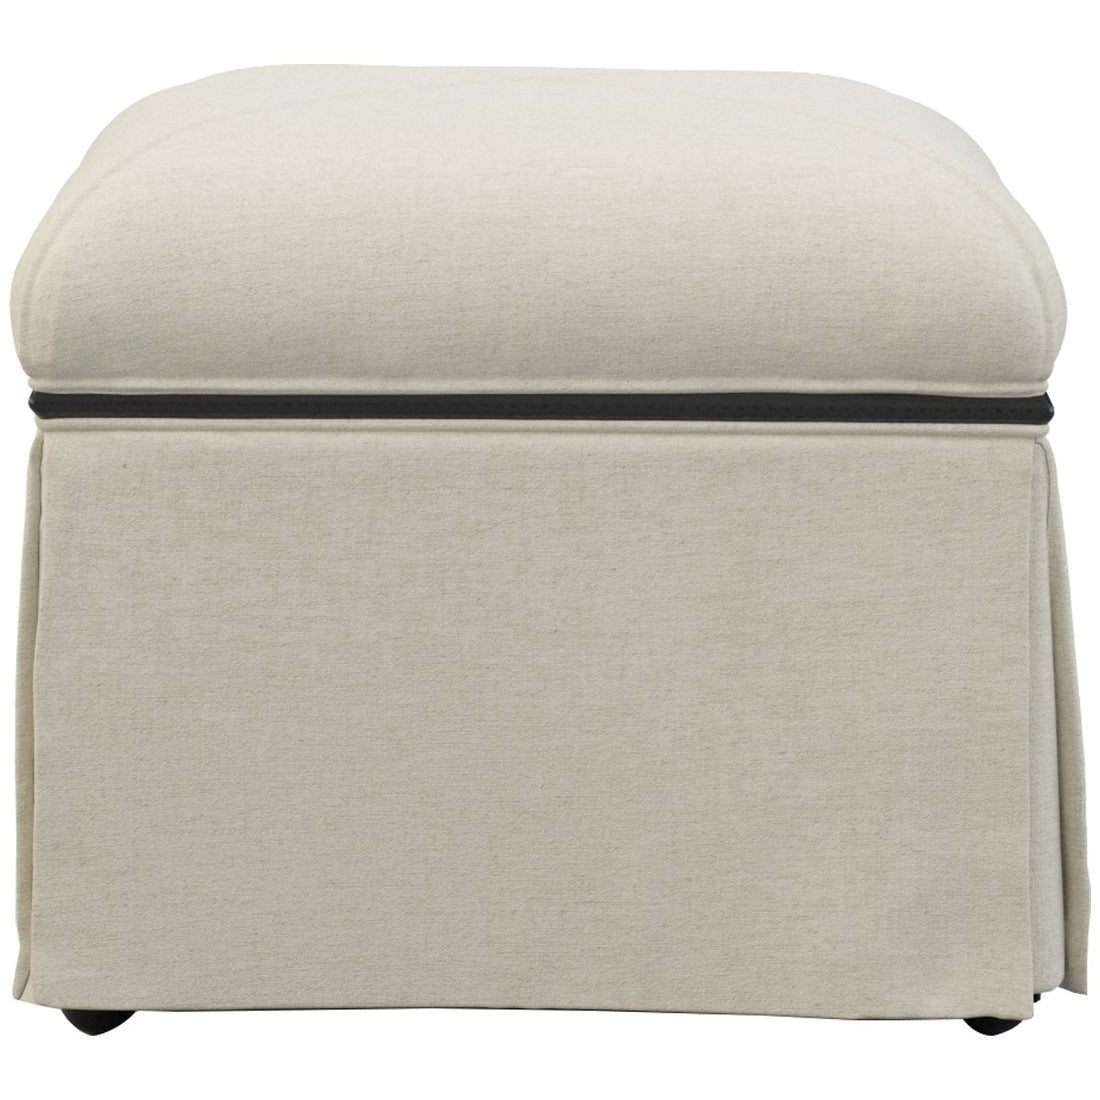 Hickory White Ottoman with Casters